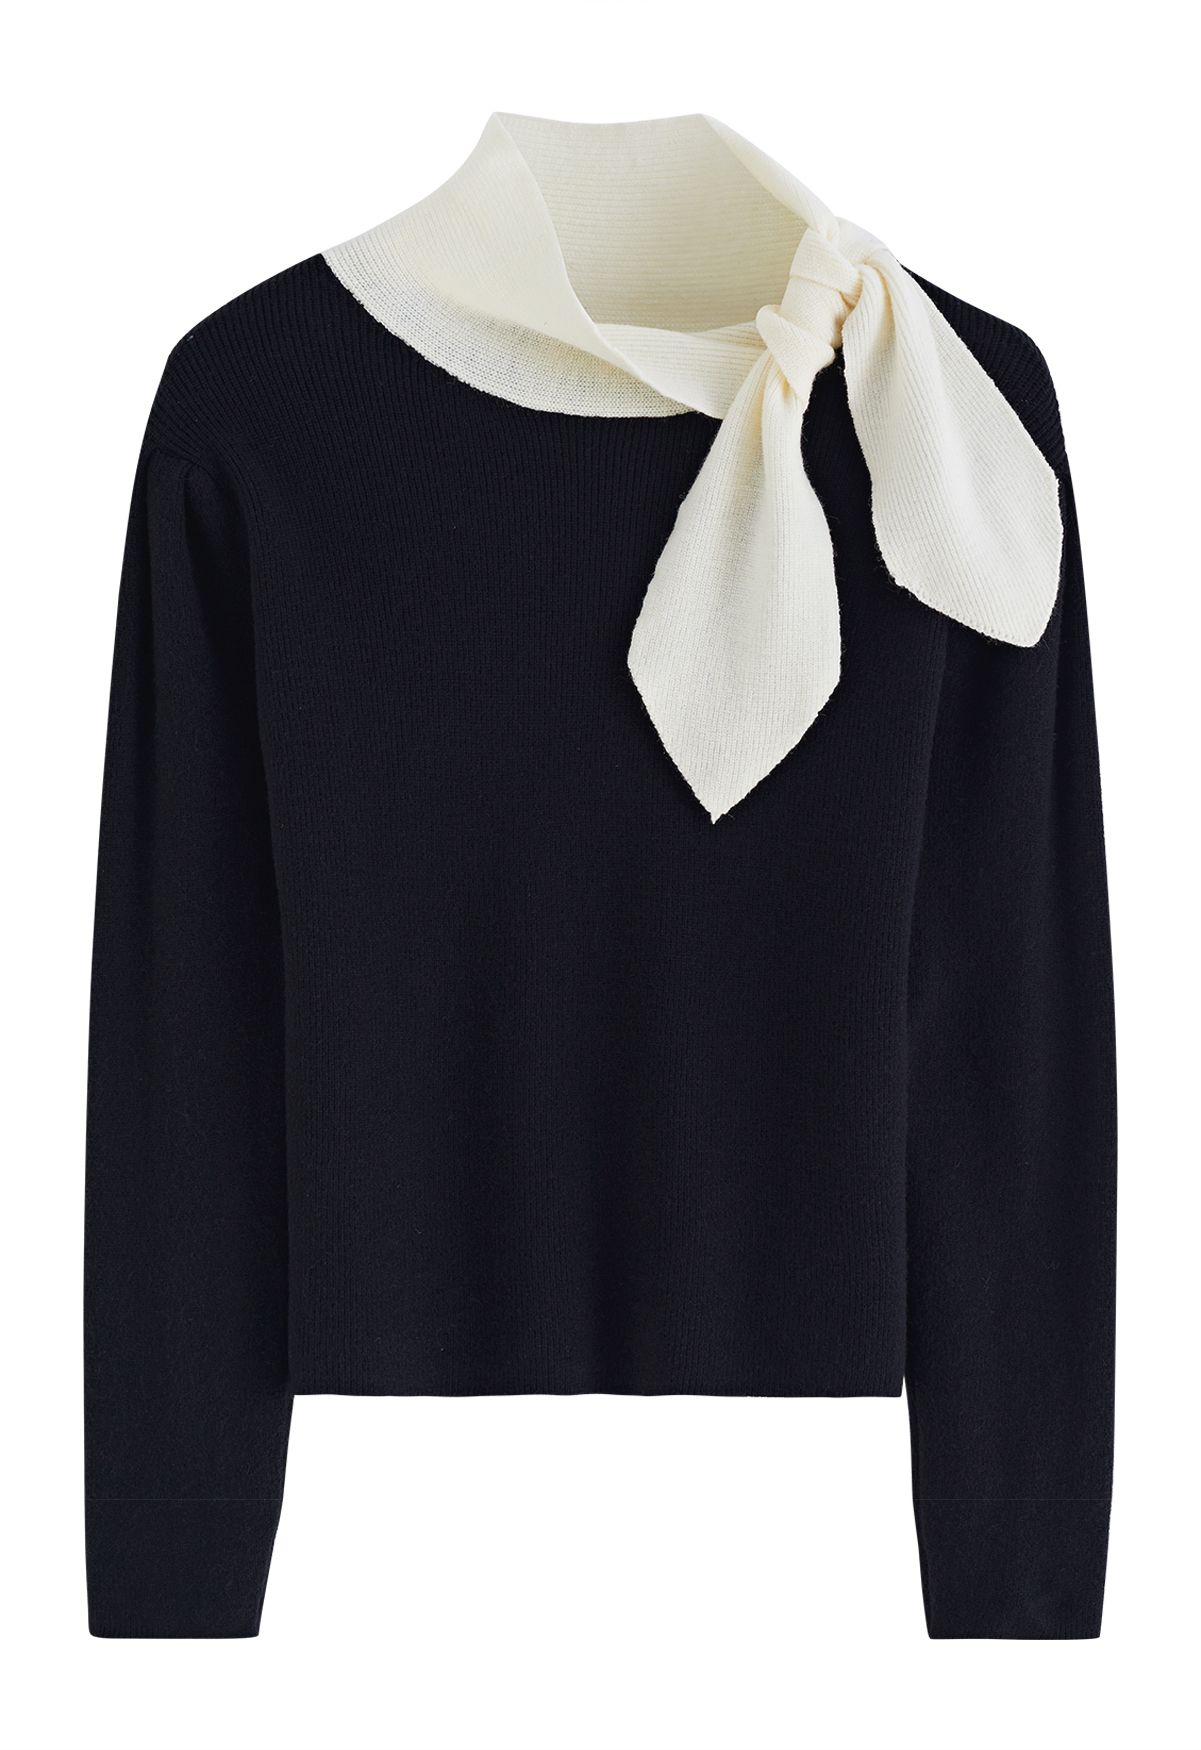 Contrast Tie-Knot Neck Knit Top in Black